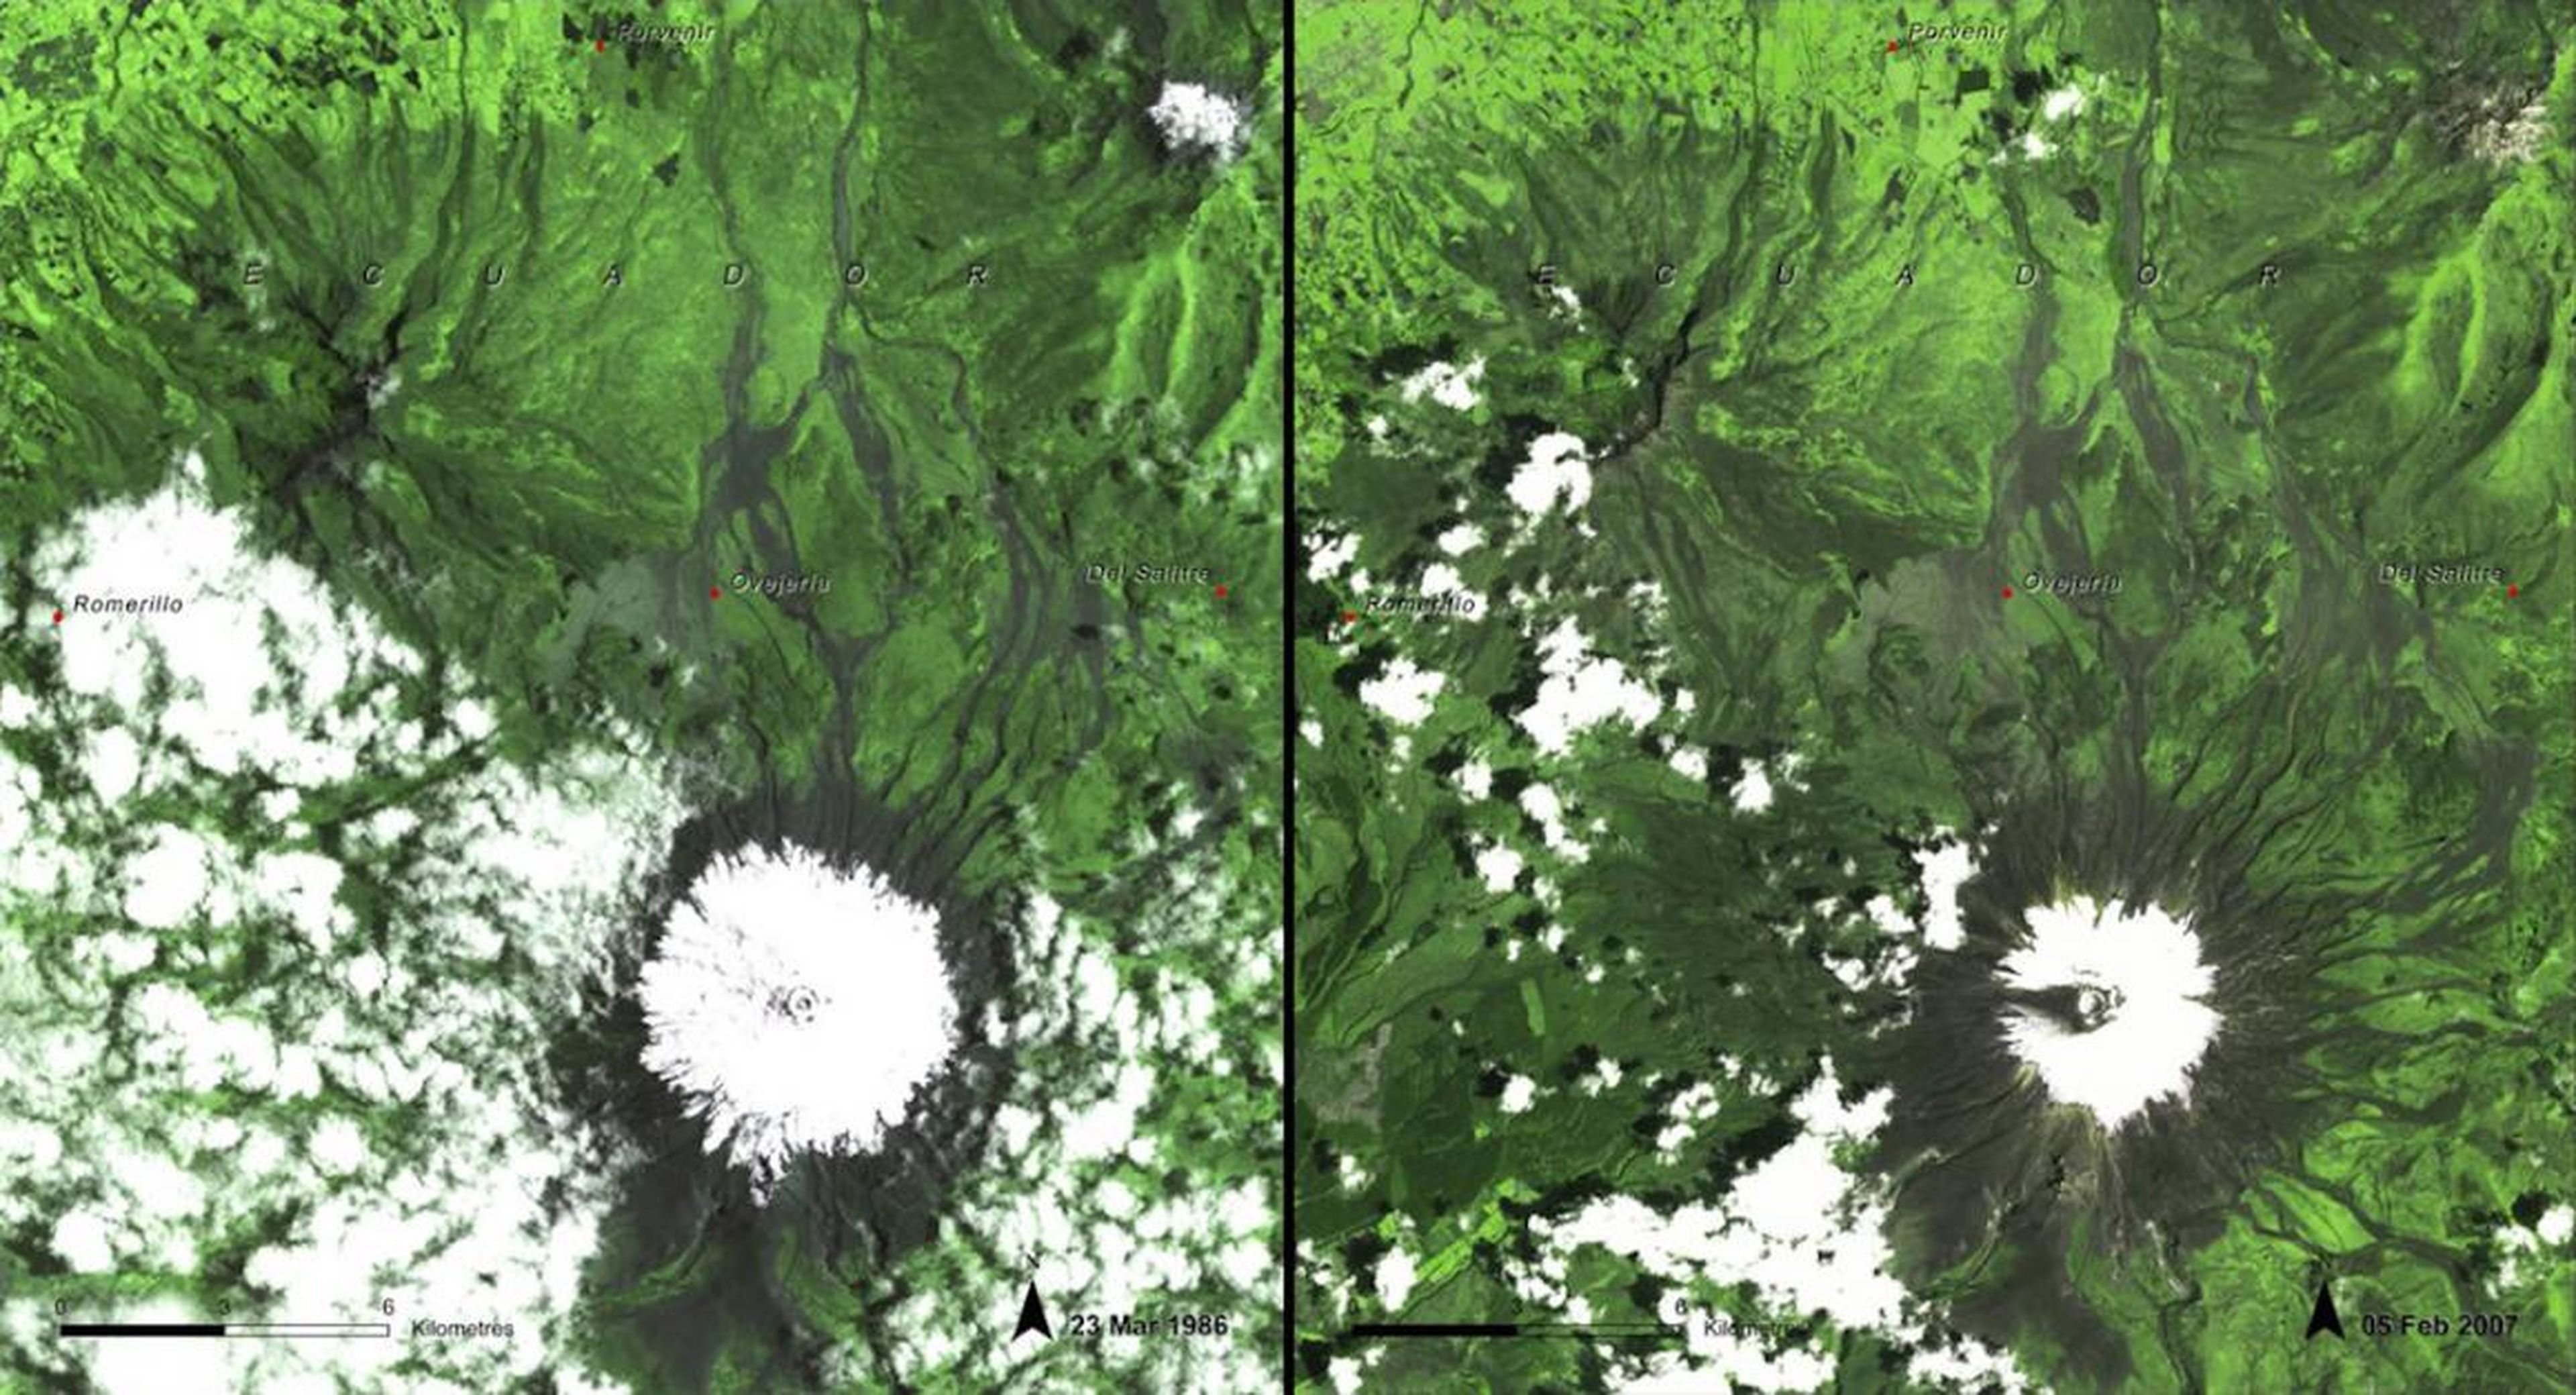 These aerial images document melting ice in Ecuador, from March 1986 (left) to February 2007 (right).